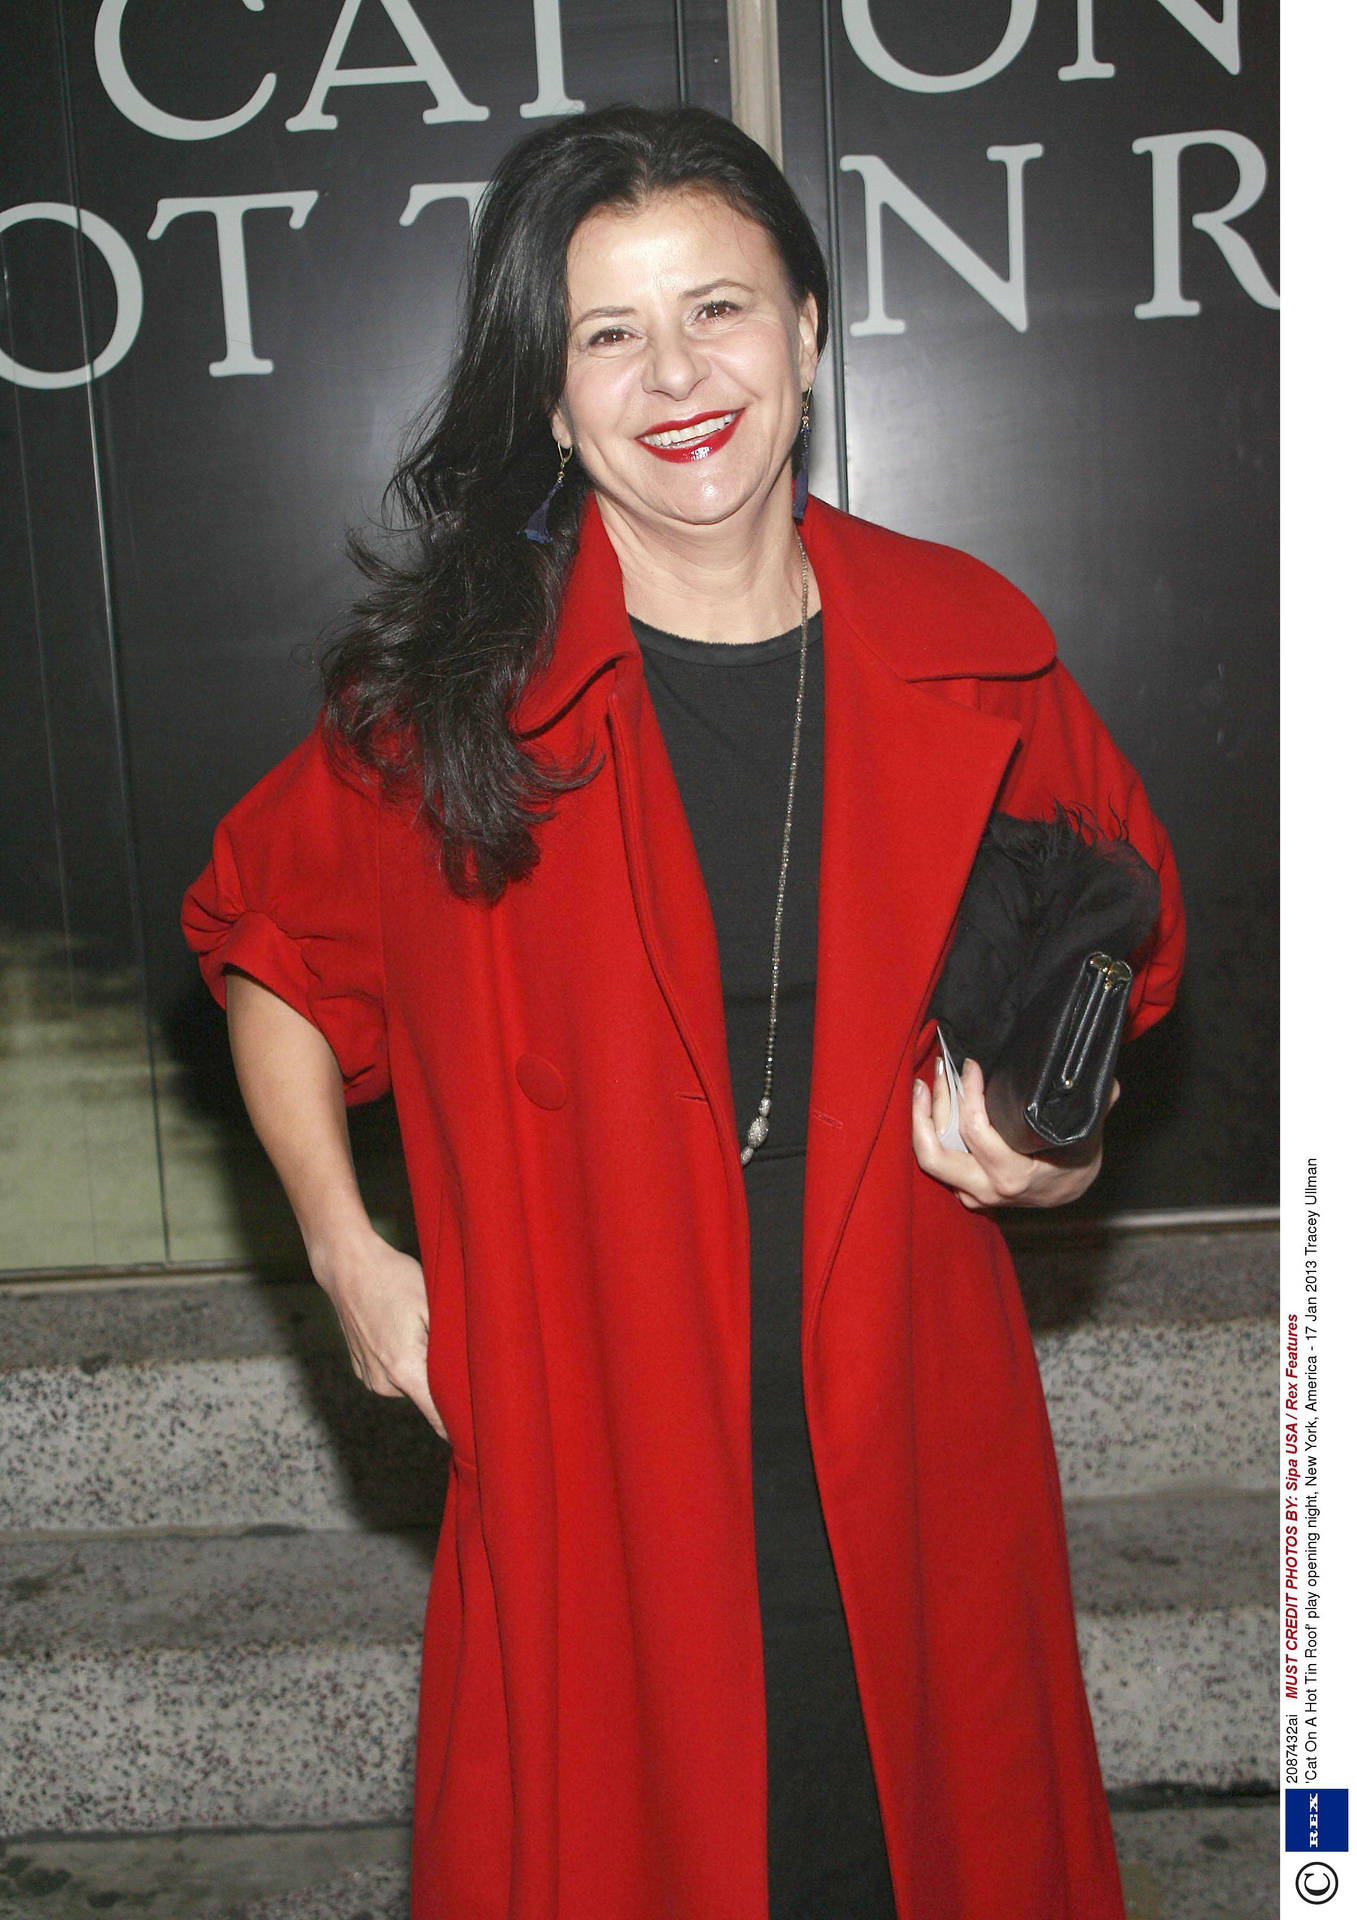 Tracey Ullman gracing the red carpet in a stylish ensemble Wallpaper